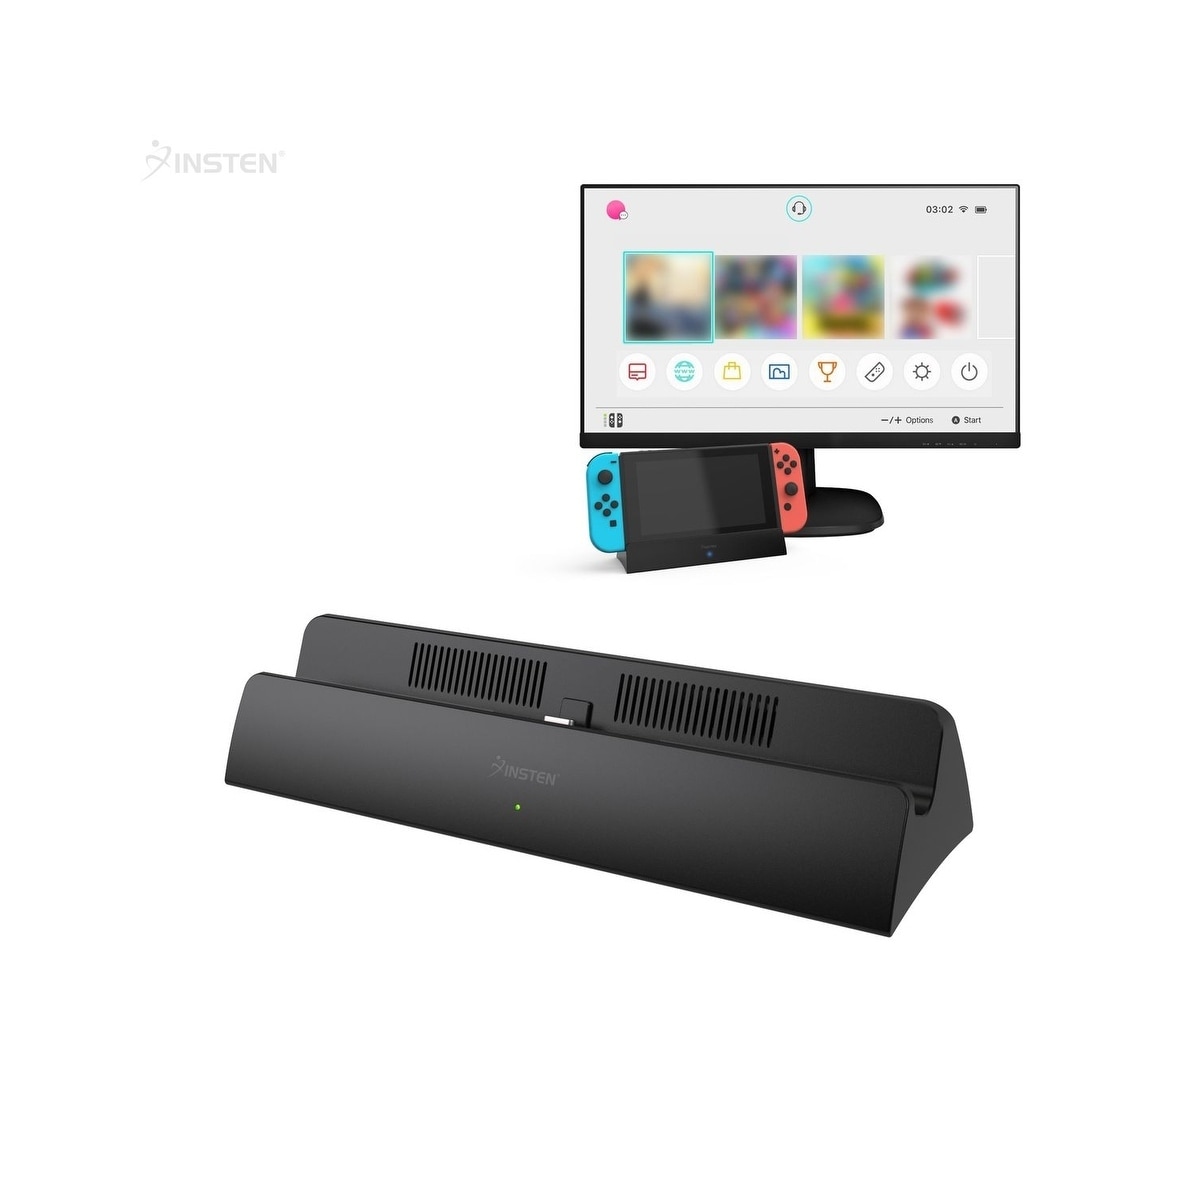 Insten Portable Dock Replacement For Nintendo Switch With Tv Toggle Button Hdmi Output Usb 3 0 2 0 Ports Black Overstock